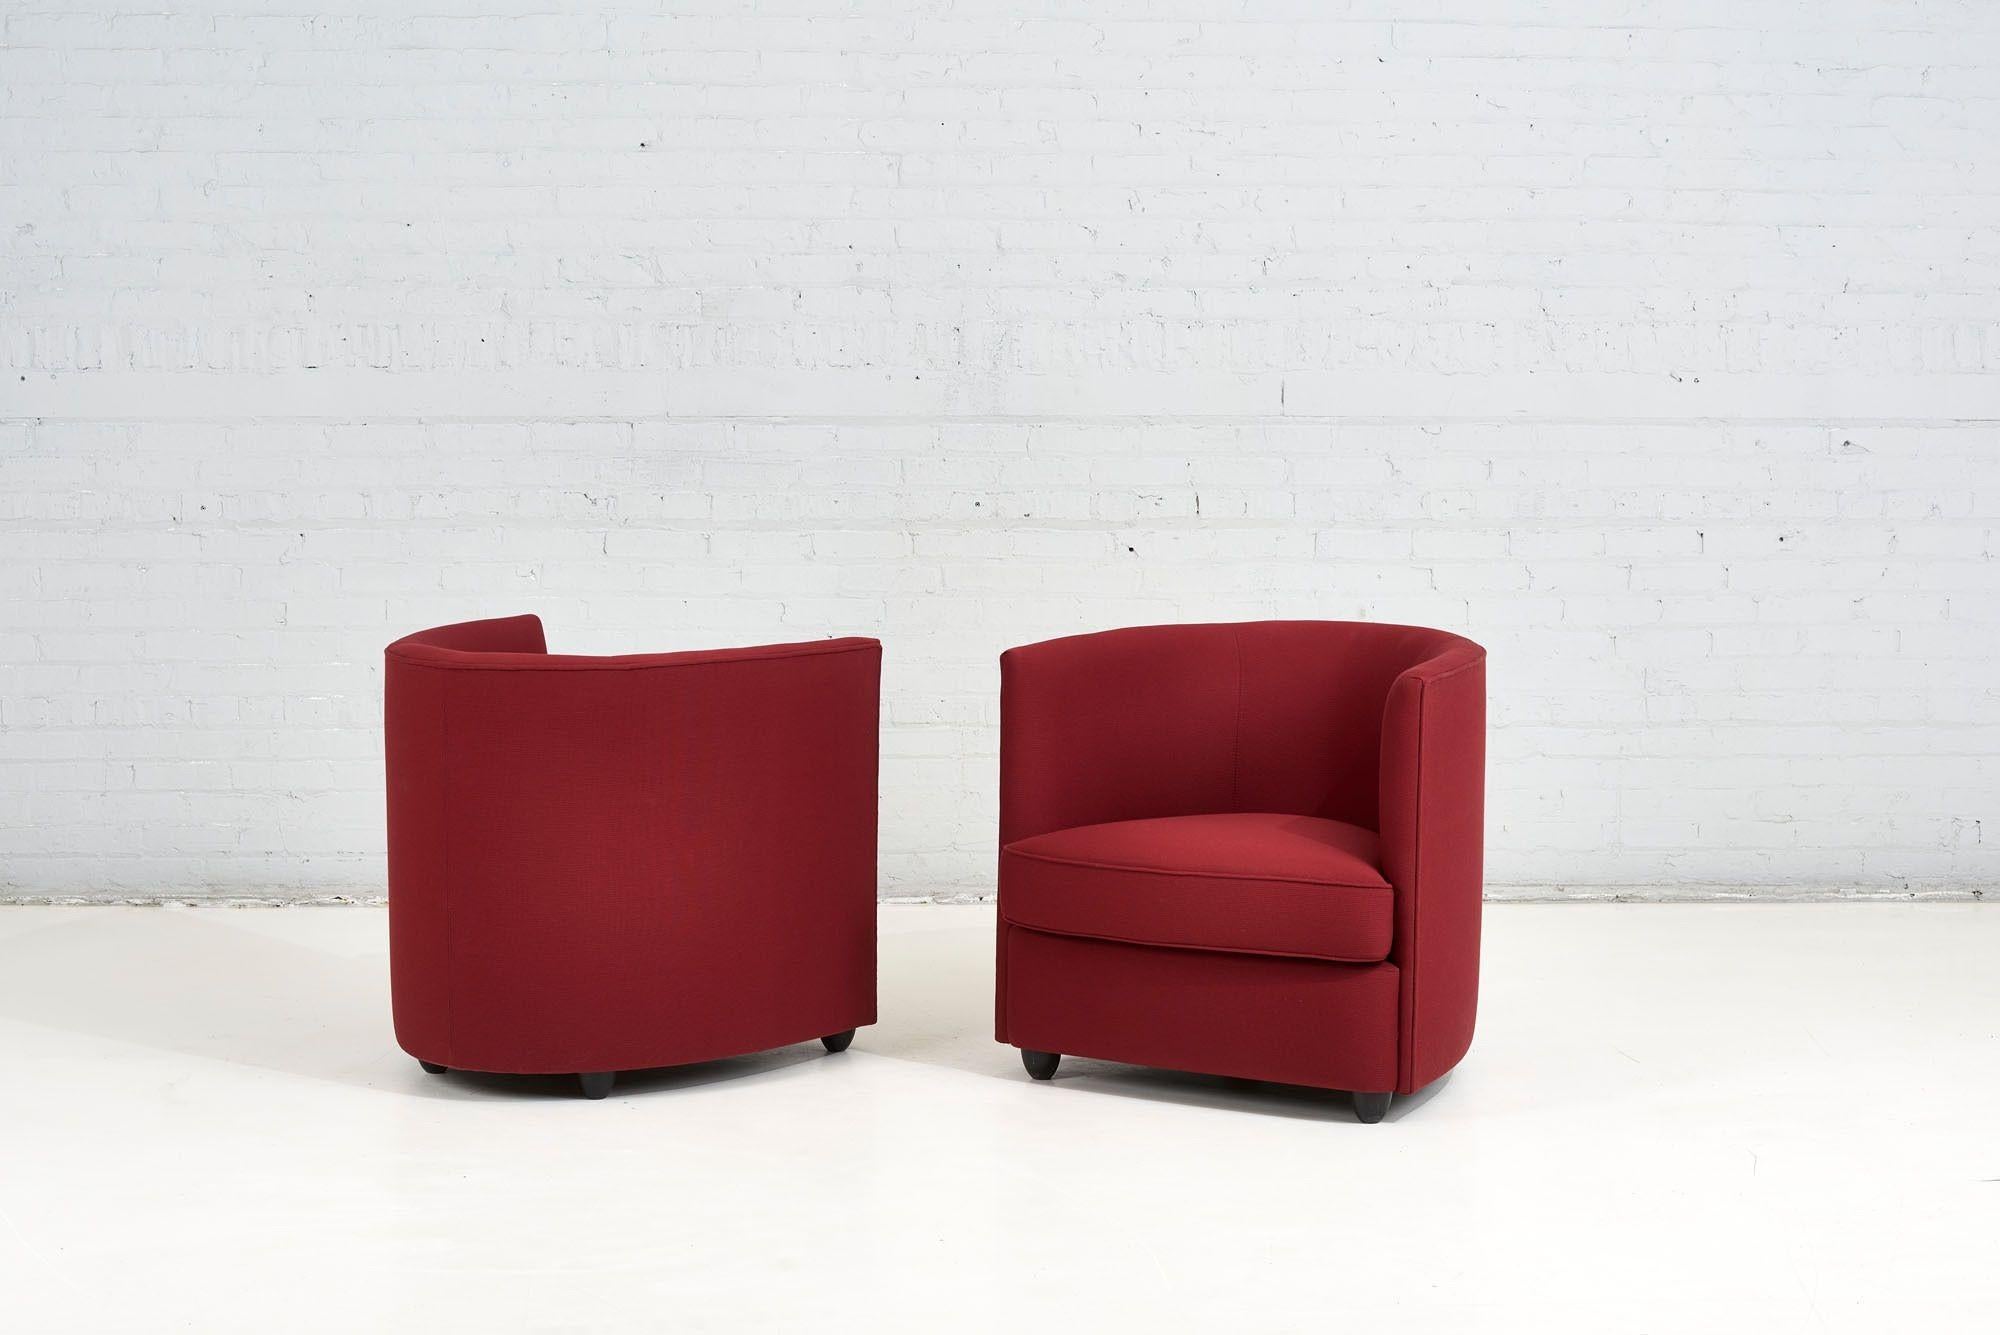 Upholstery Andree Putman Pair Crescent Lounge Chair, 1980 For Sale